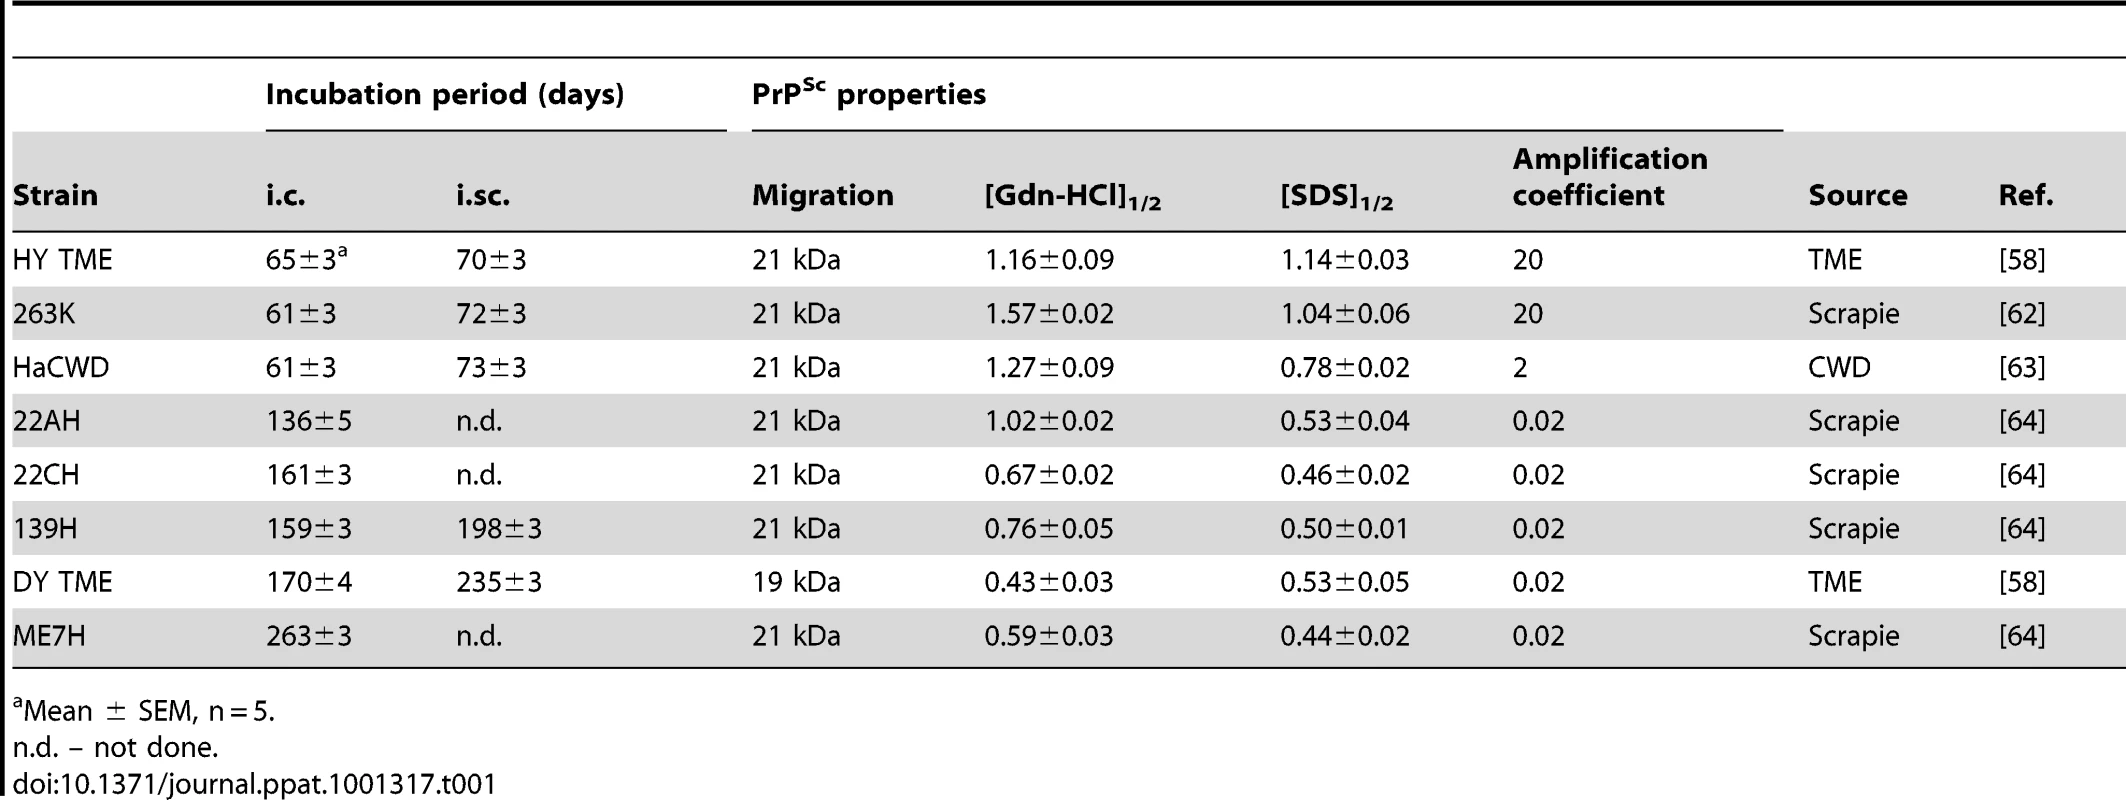 Properties of hamster-adapted prion strains.